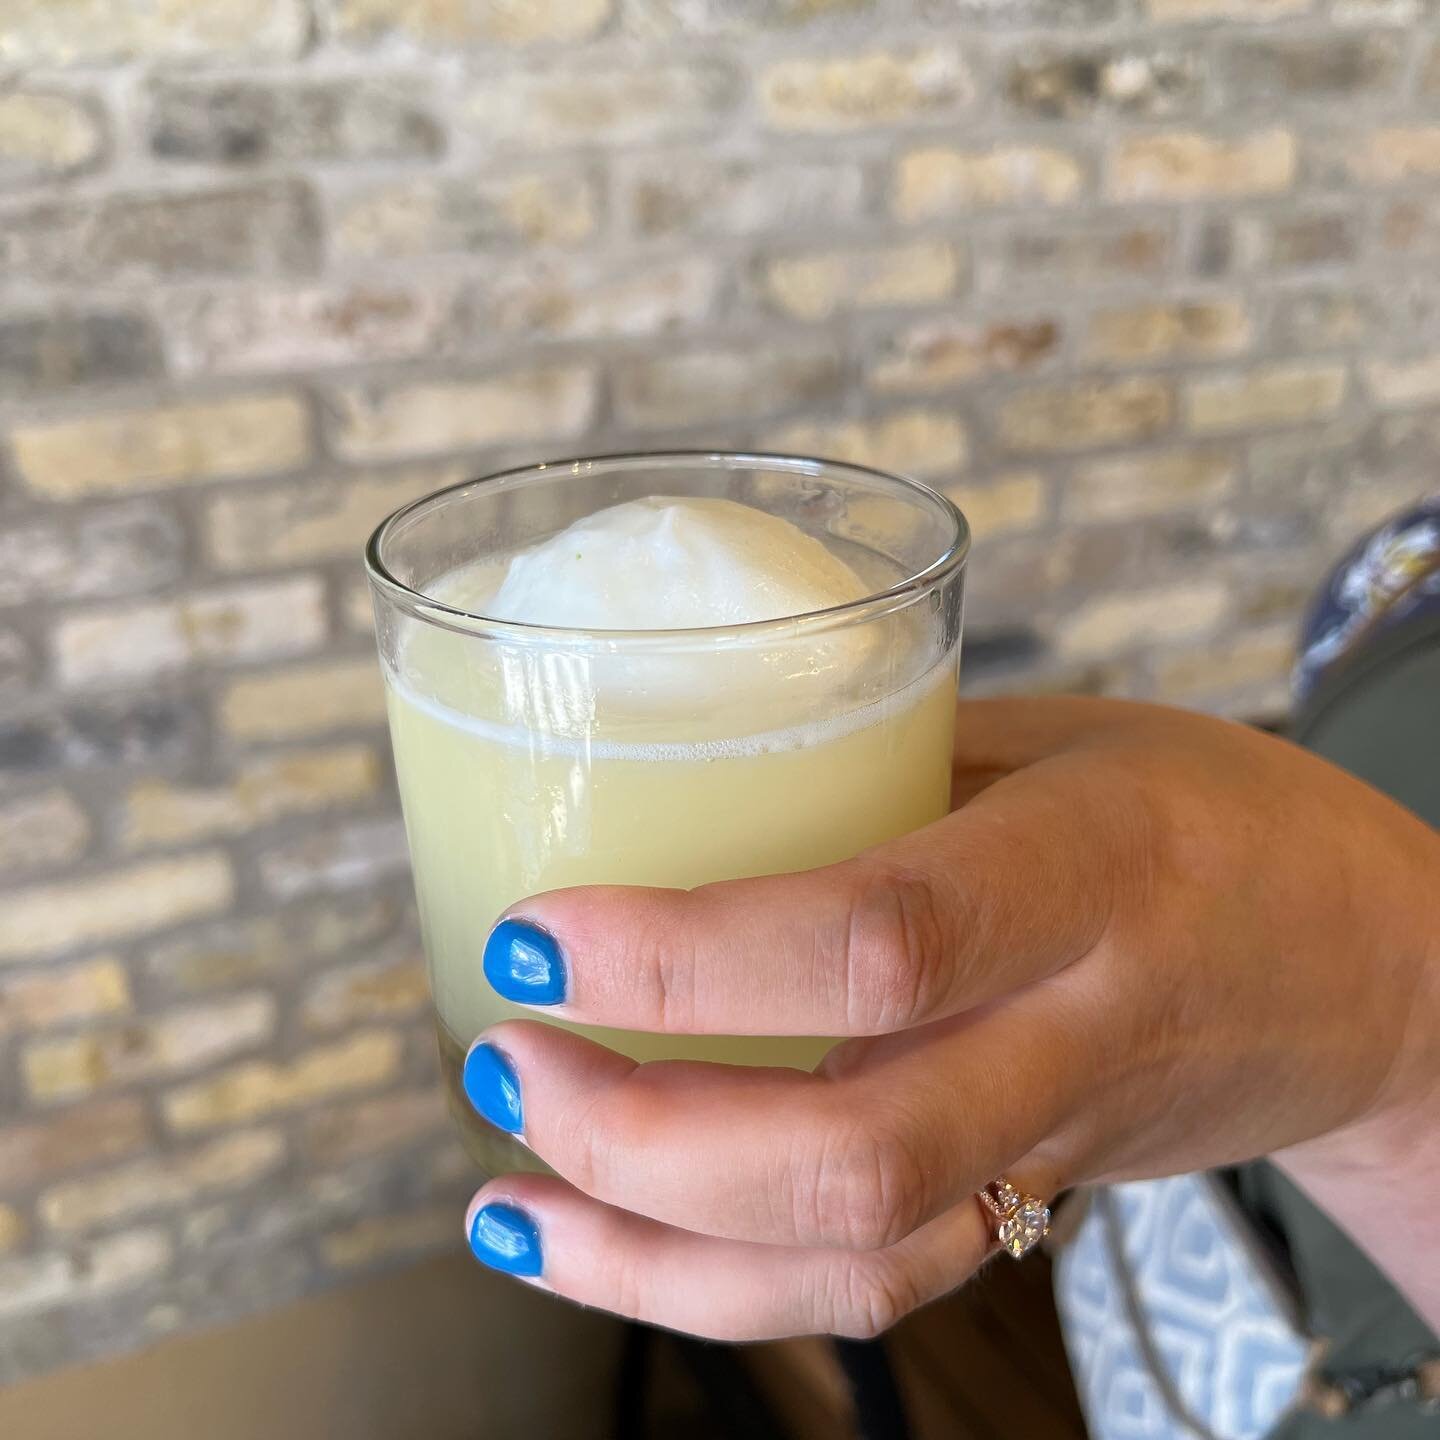 Labor Day weekend plans: 
Pour your favorite margarita mix in a sugar or salt rimmed glass. Top with two scoops of Margarita Sorbet (and an extra shot of tequila) and enjoy!

Cheers to the long weekend. Find us at:
📍Wisconsin
@southshorefarmersmarke